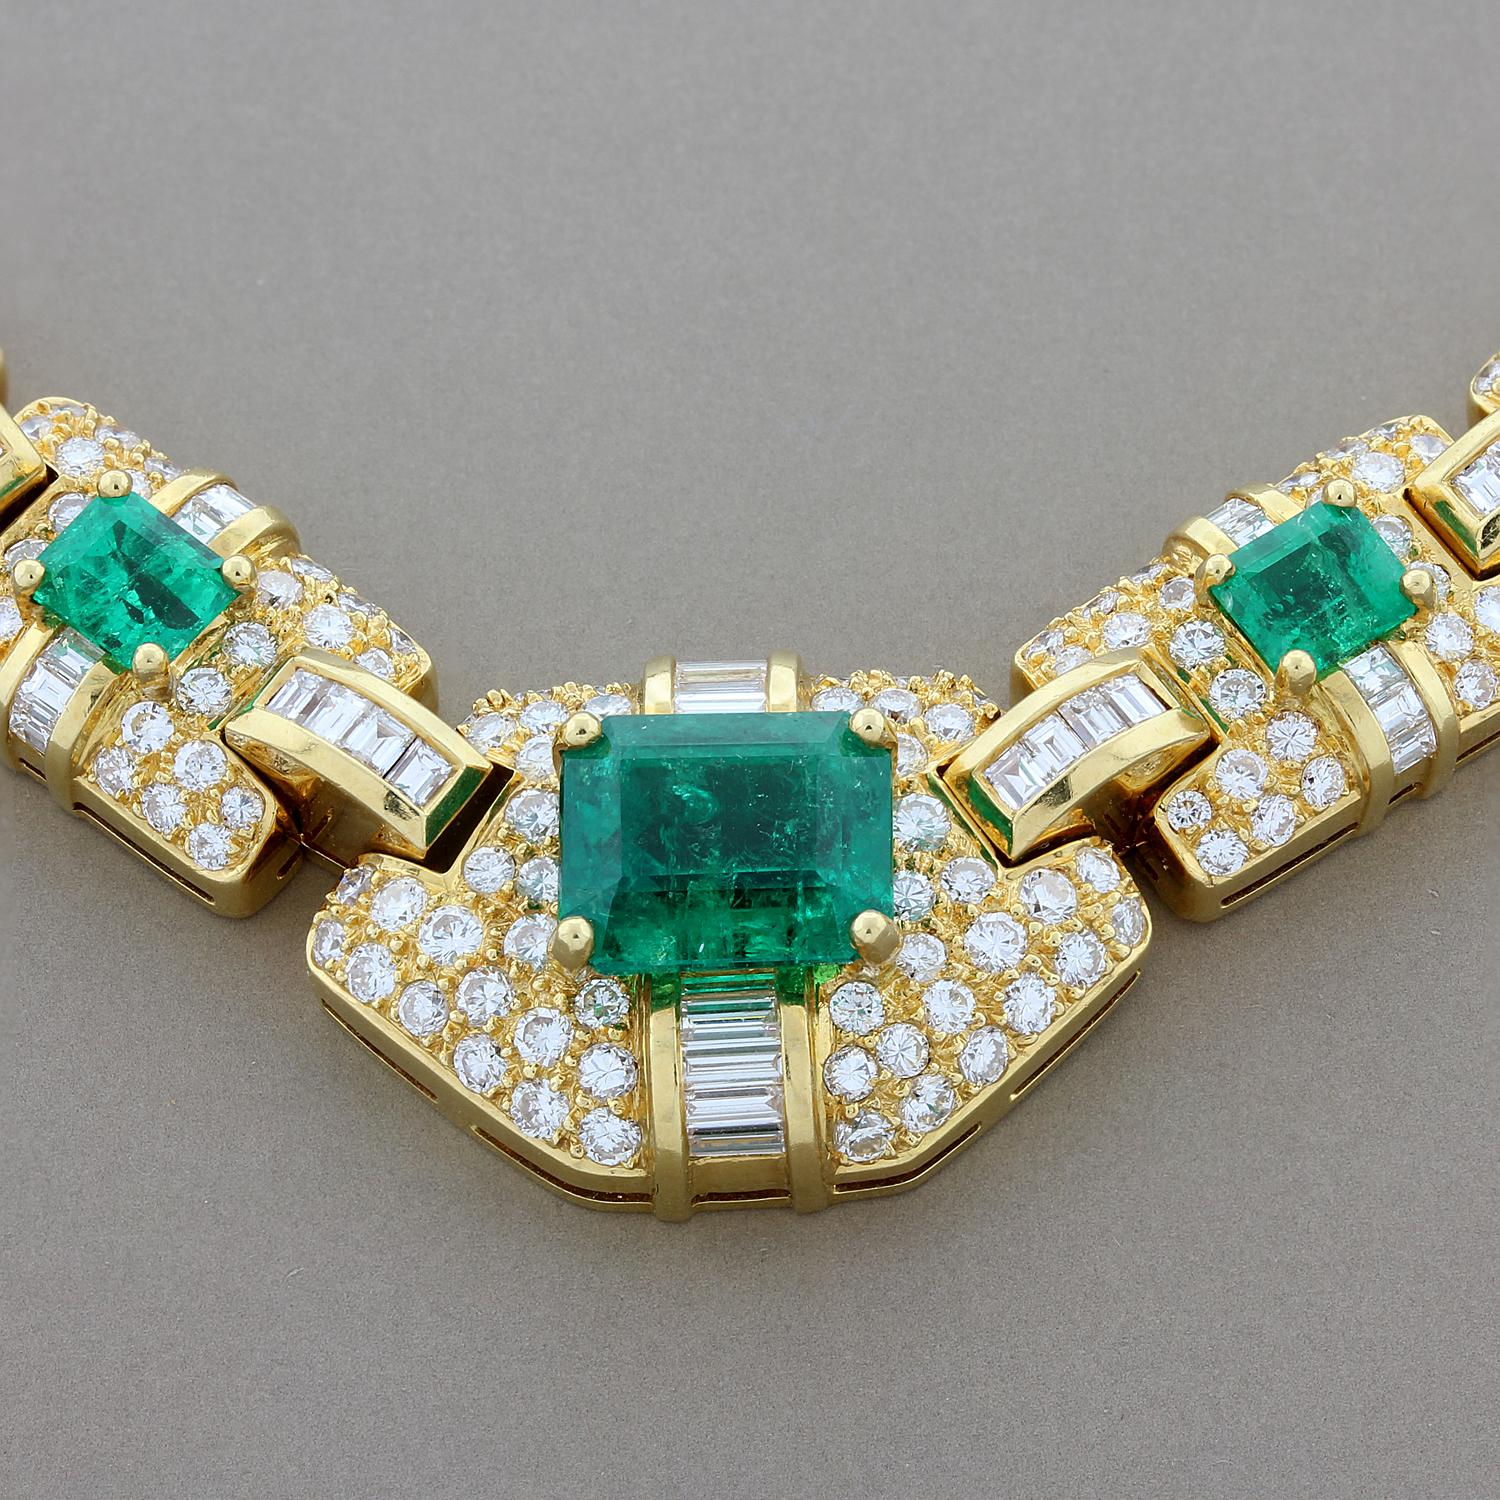 An elegant emerald diamond necklace featuring a 4.35 carat vivid green emerald cut emerald which we believe to have Columbian origin. Two smaller emeralds complement the centerpiece which is covered in approximately 4.50 carats of baguette and